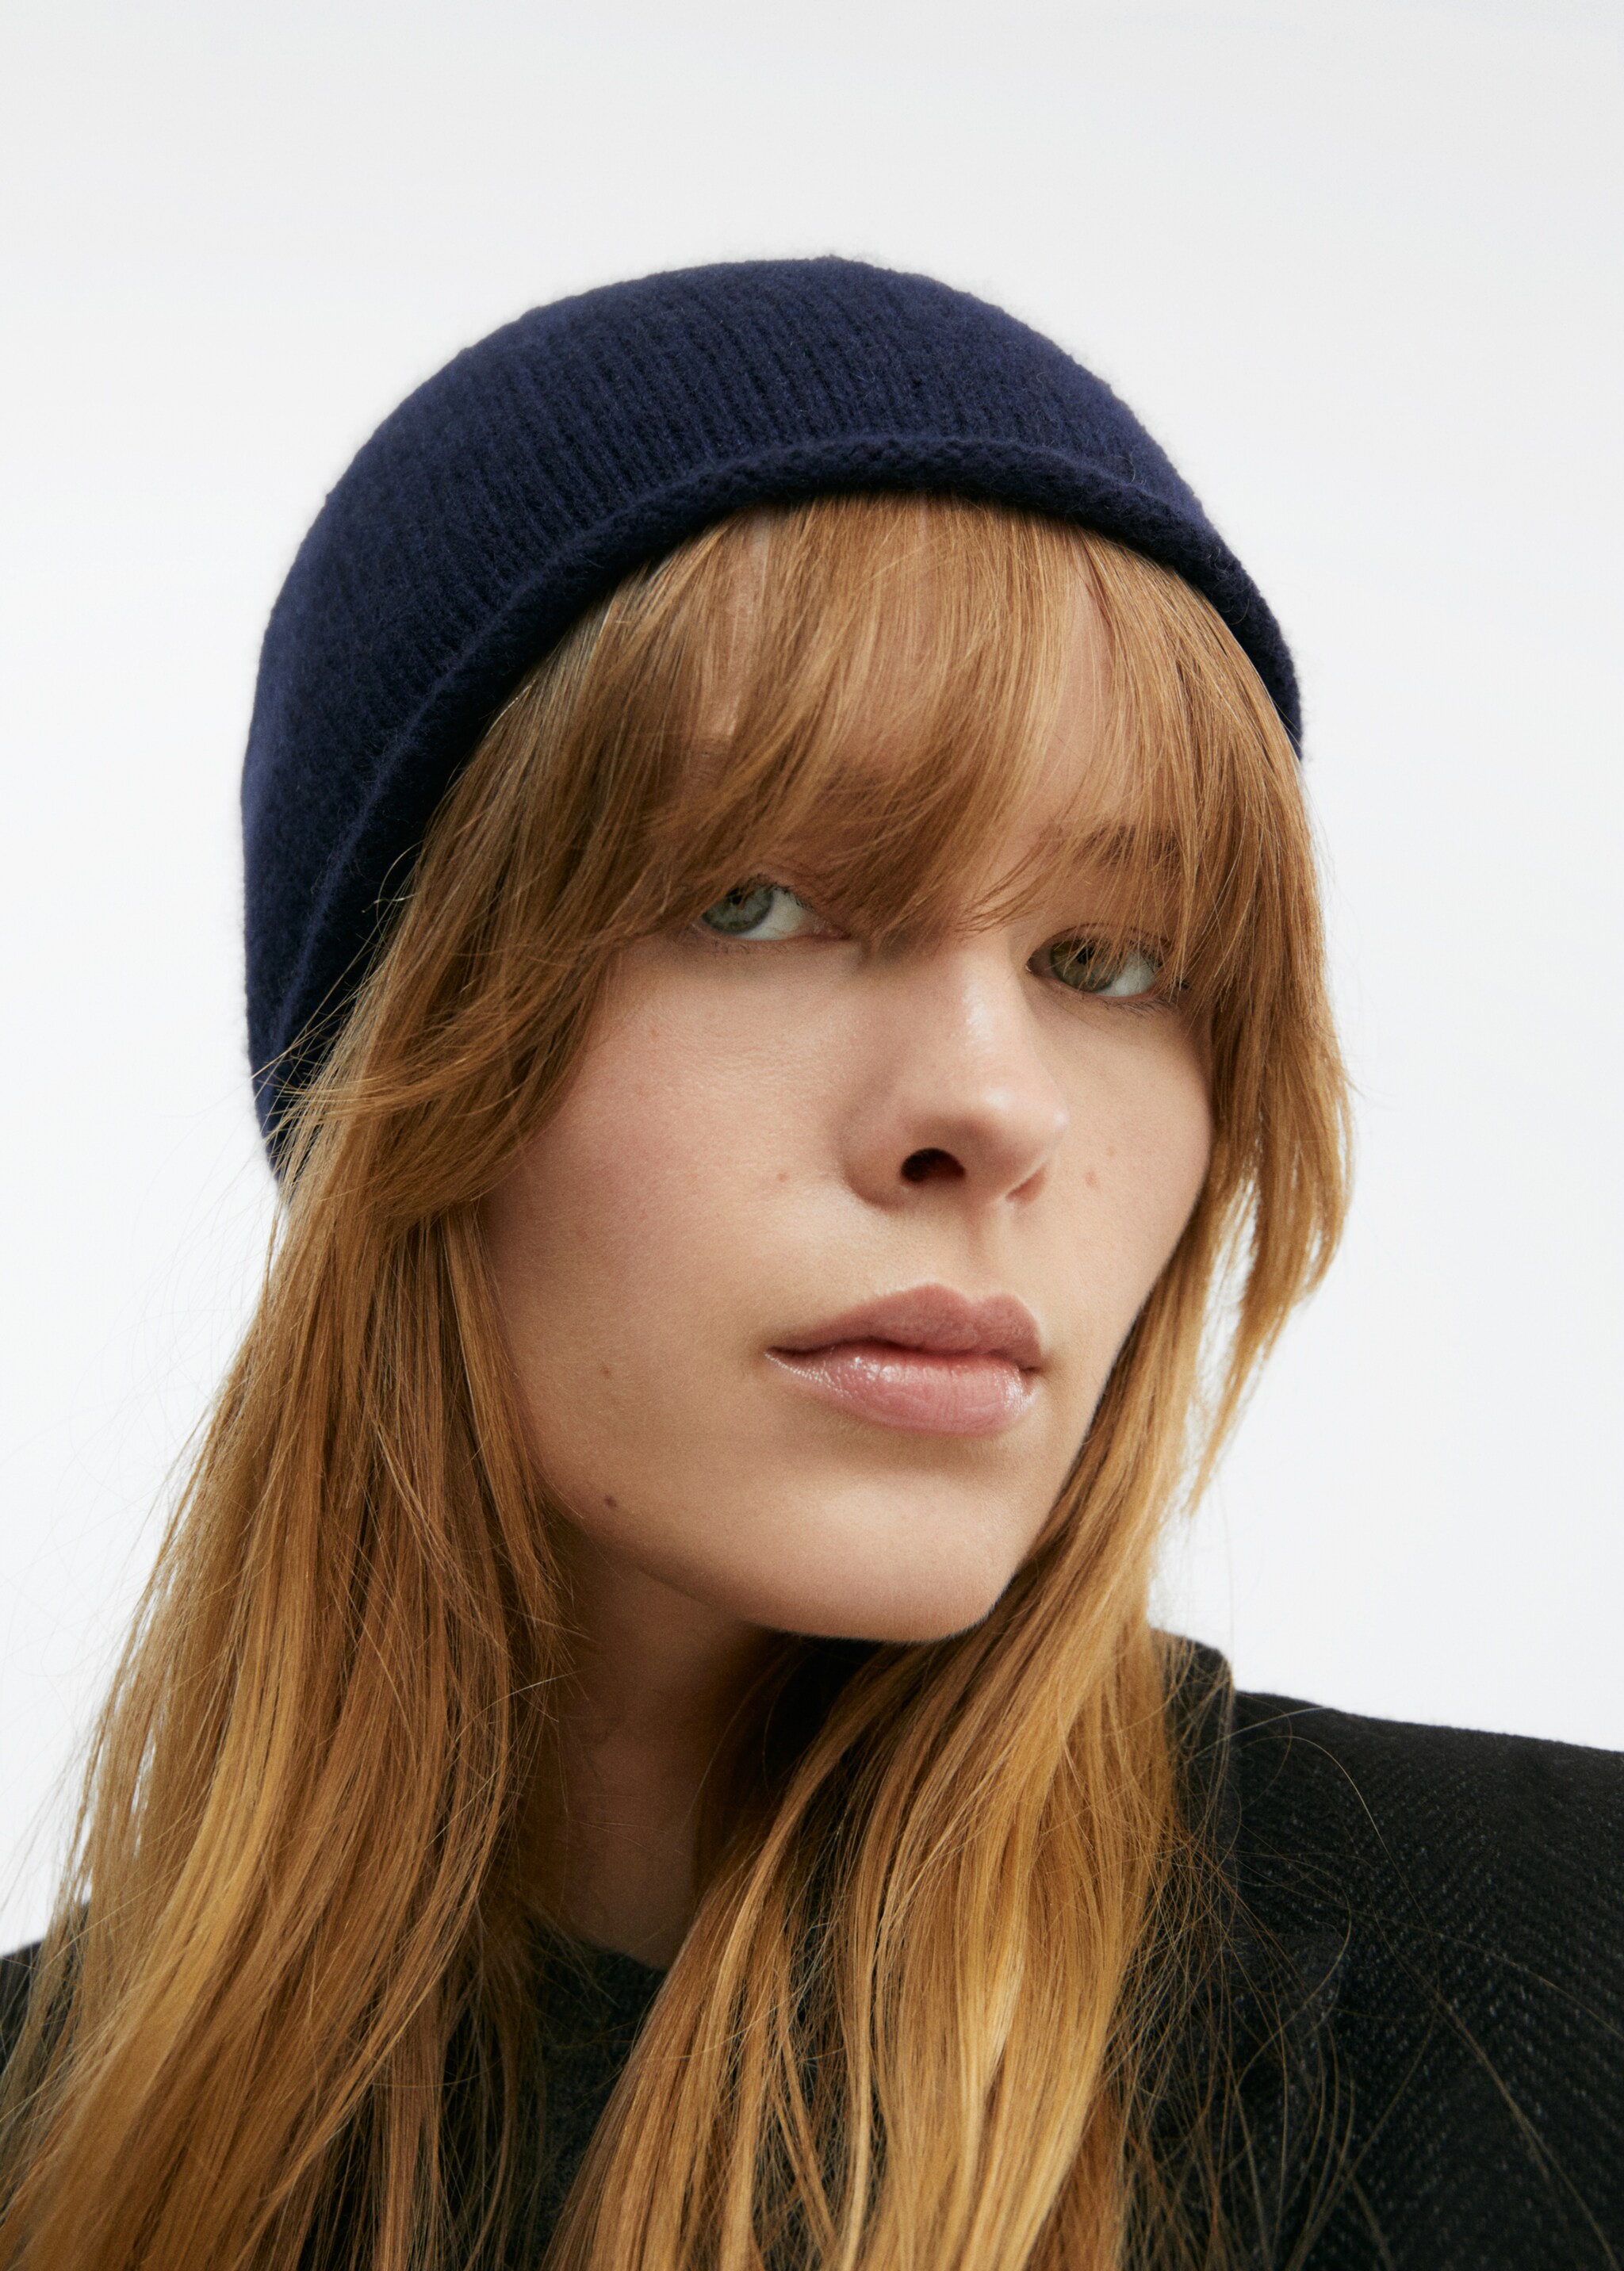 Cashmere knitted hat - Details of the article 9